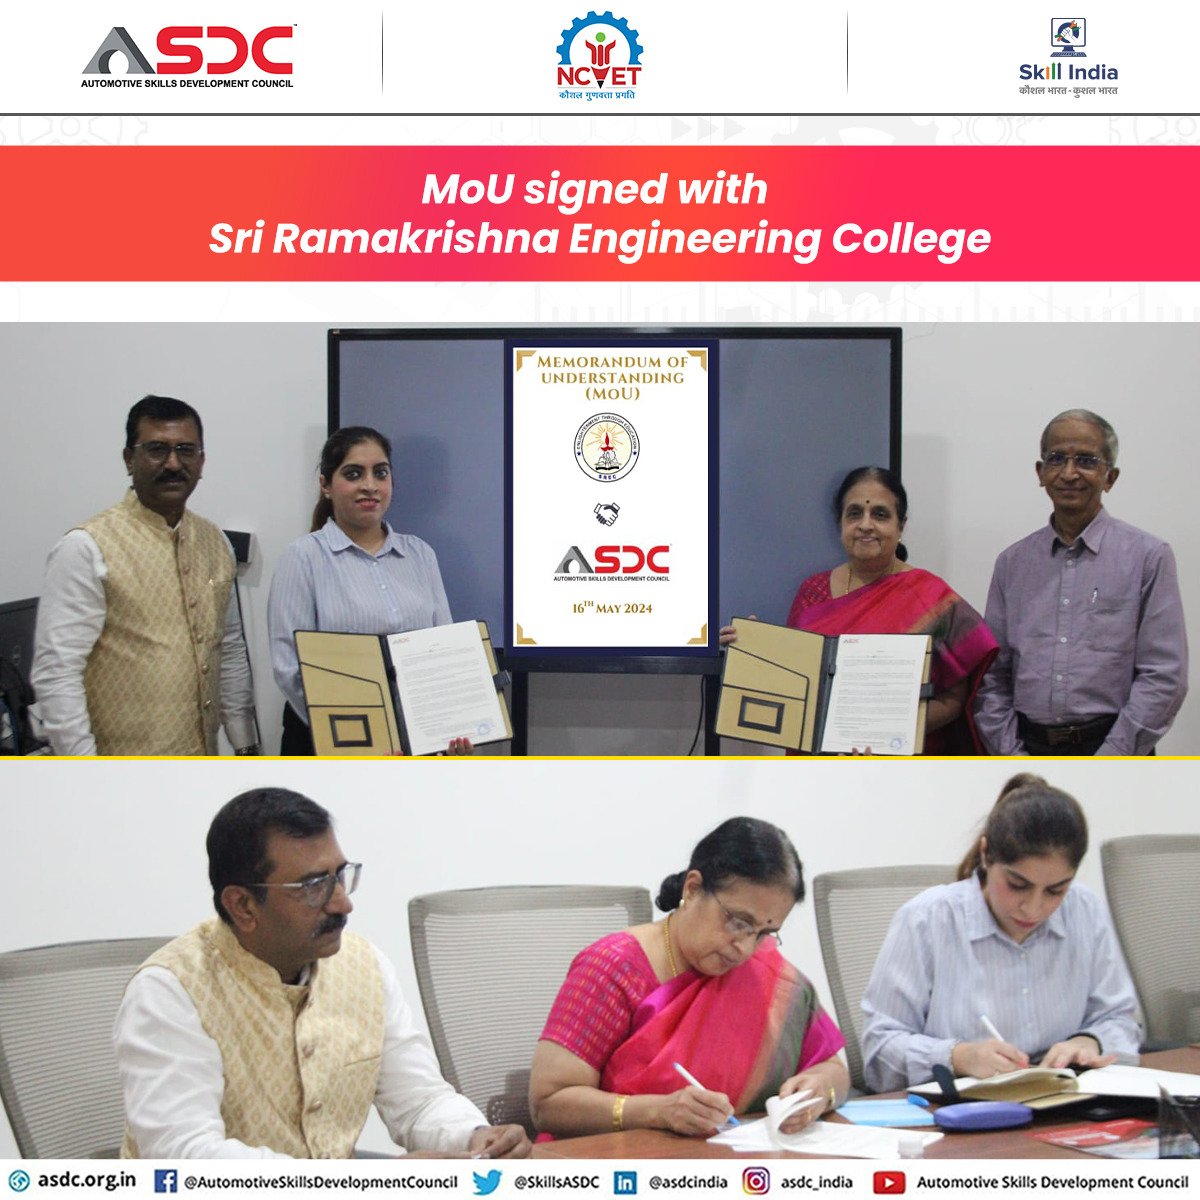 Signed a MoU with Sri Ramakrishna Engineering College for implementing a 60-hour qualification, a significant step towards enhancing educational opportunities. #Mousigning #Education